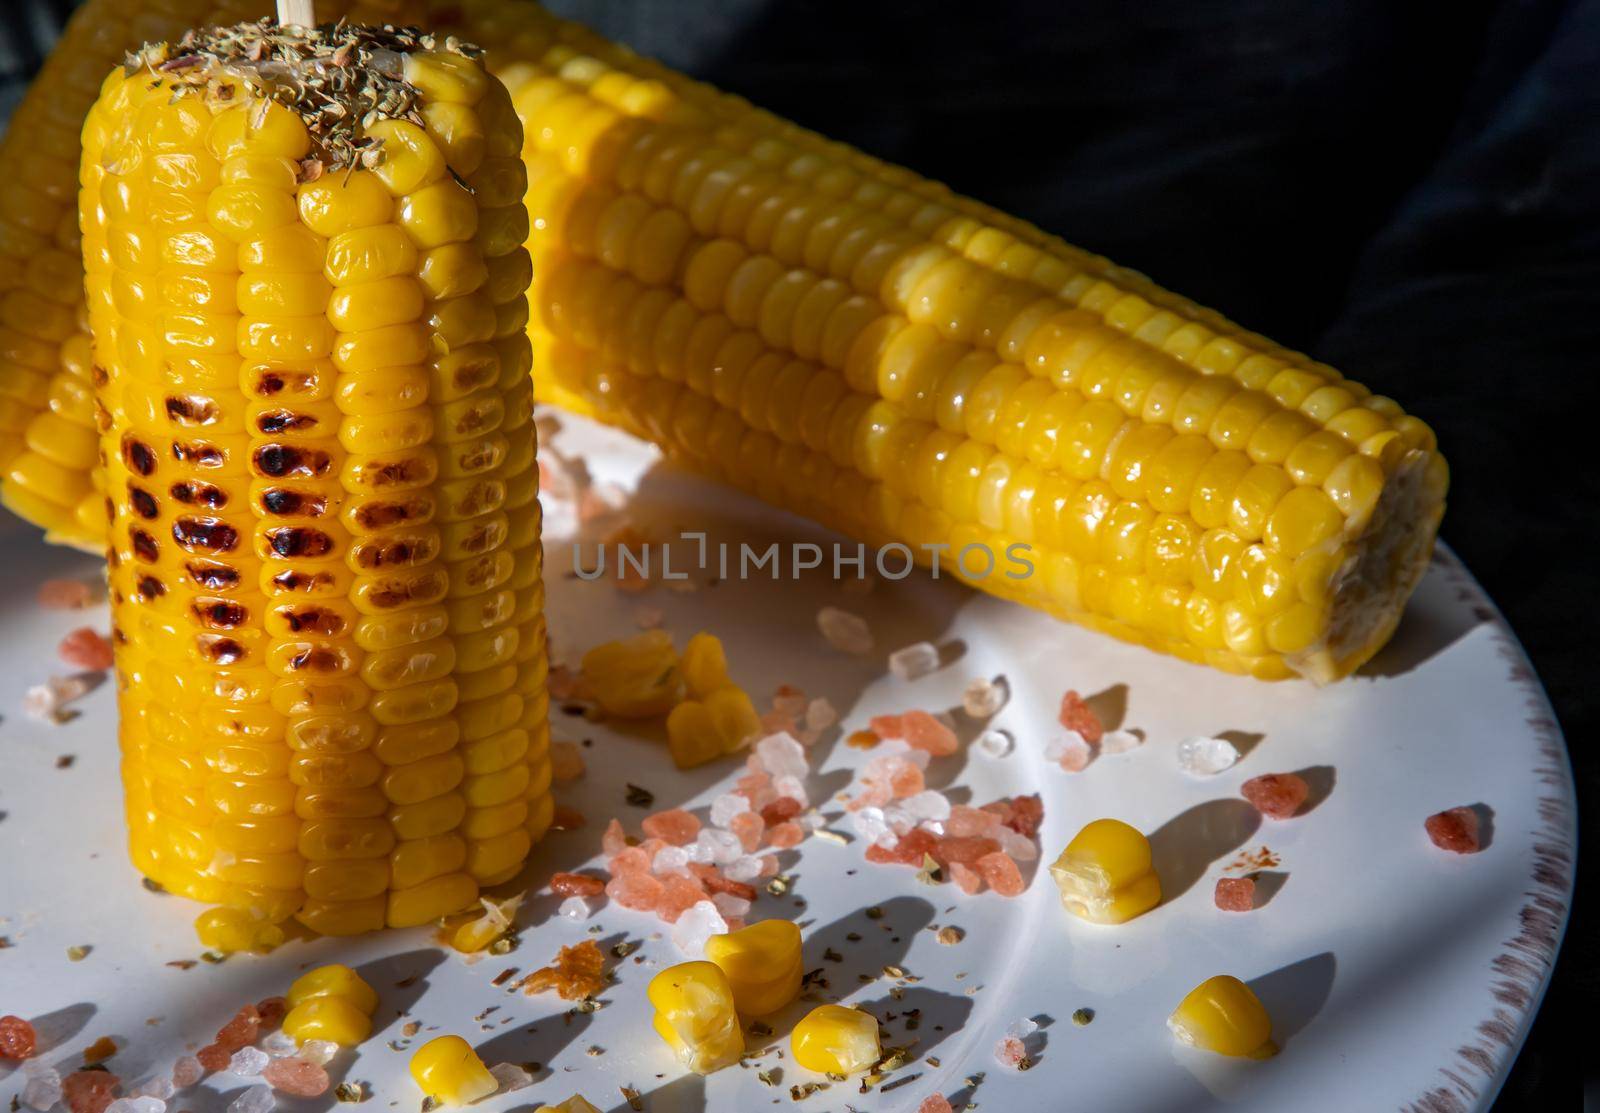 Grilled corn on the cob  on classic white plate over dark background. by tosirikul